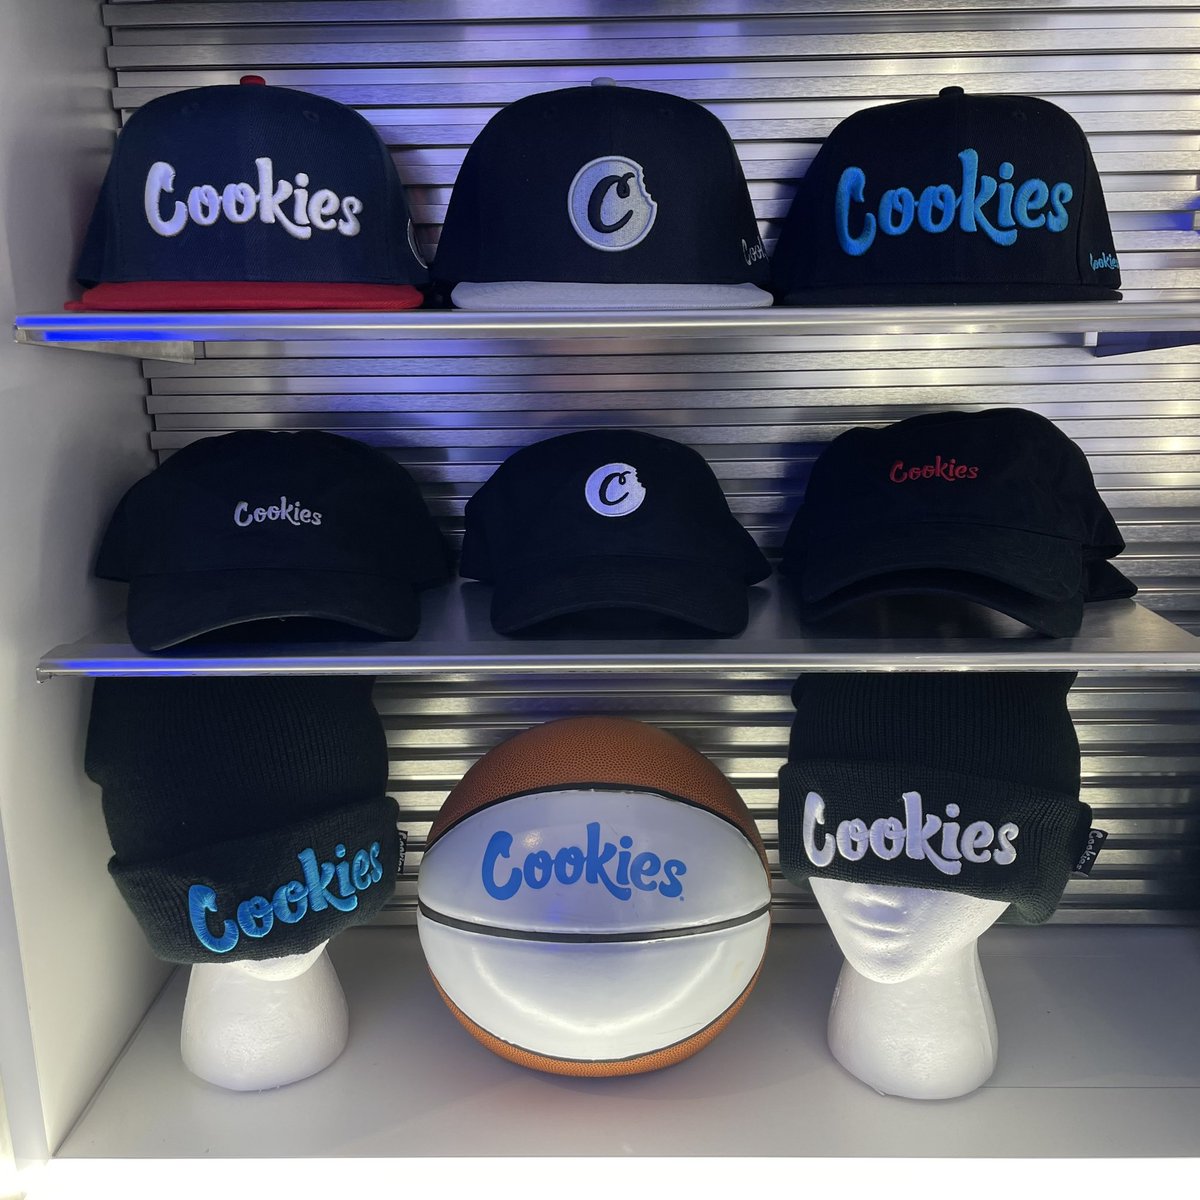 Stay Warm! 🥶 Cookies Hats & Beanies #AvailableNow #CookiesMaywood #Cookies #CookiesClothing #CookiesHats #CookiesBeanies